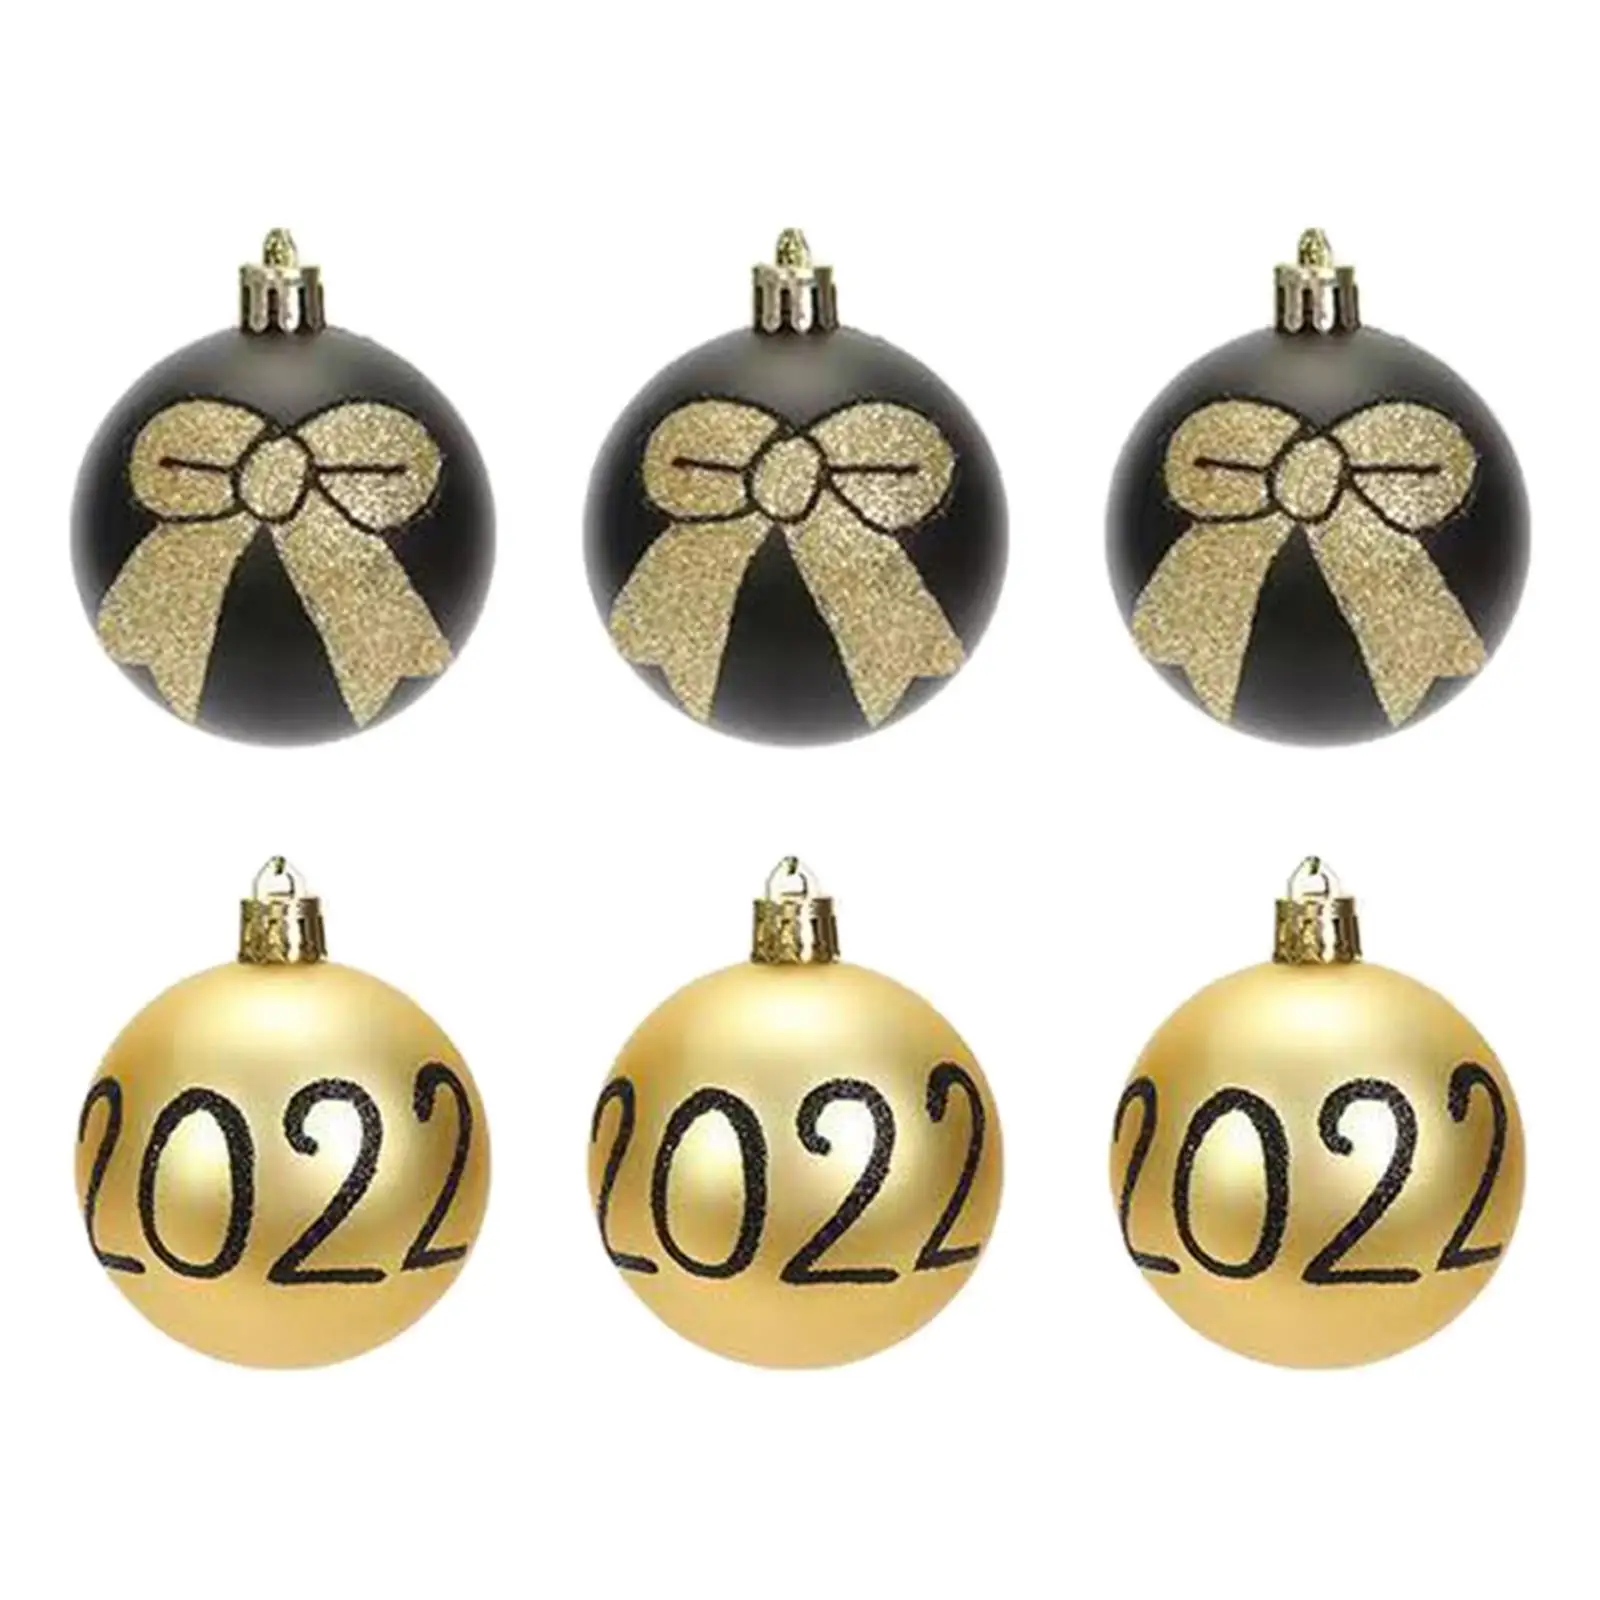 

6 Pieces Christmas Ball Ornaments Tree Decor Baubles Shatterproof Xmas Decorations for Holiday Anniversary Engagement Wedding